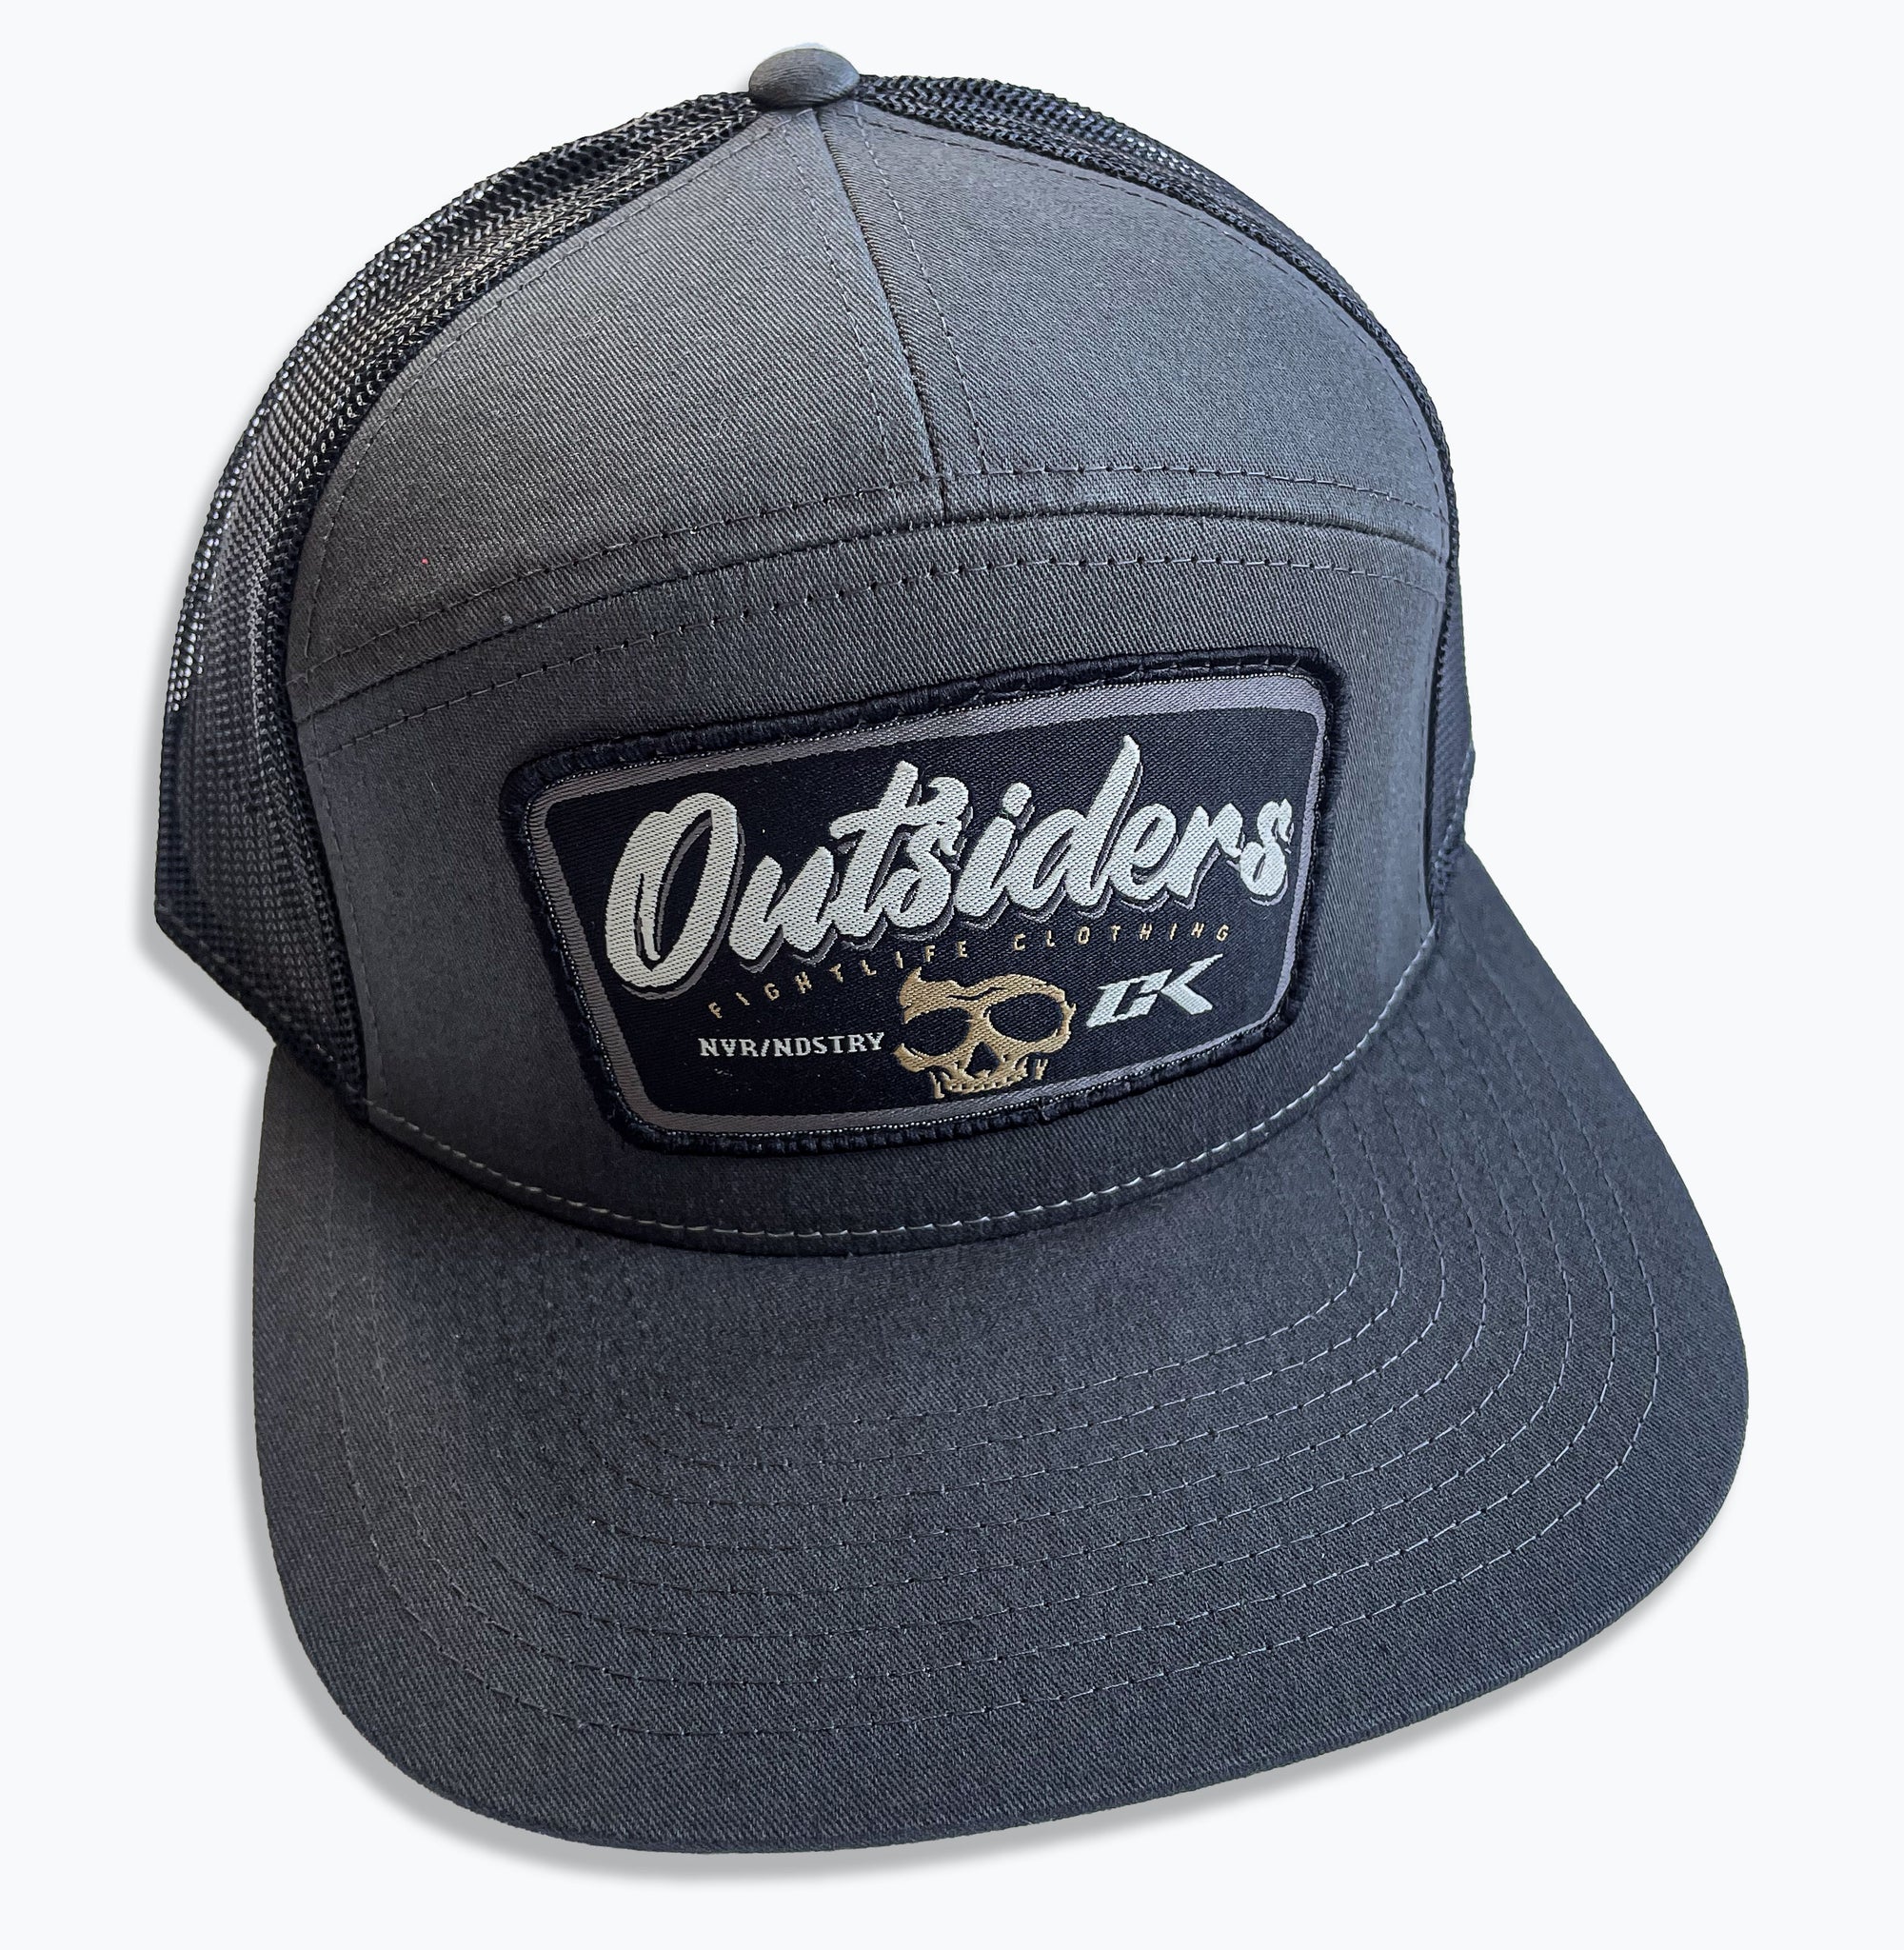 NEW CK FIGHTLIFE 7 PANEL CAP "OUTSIDERS" GRAY